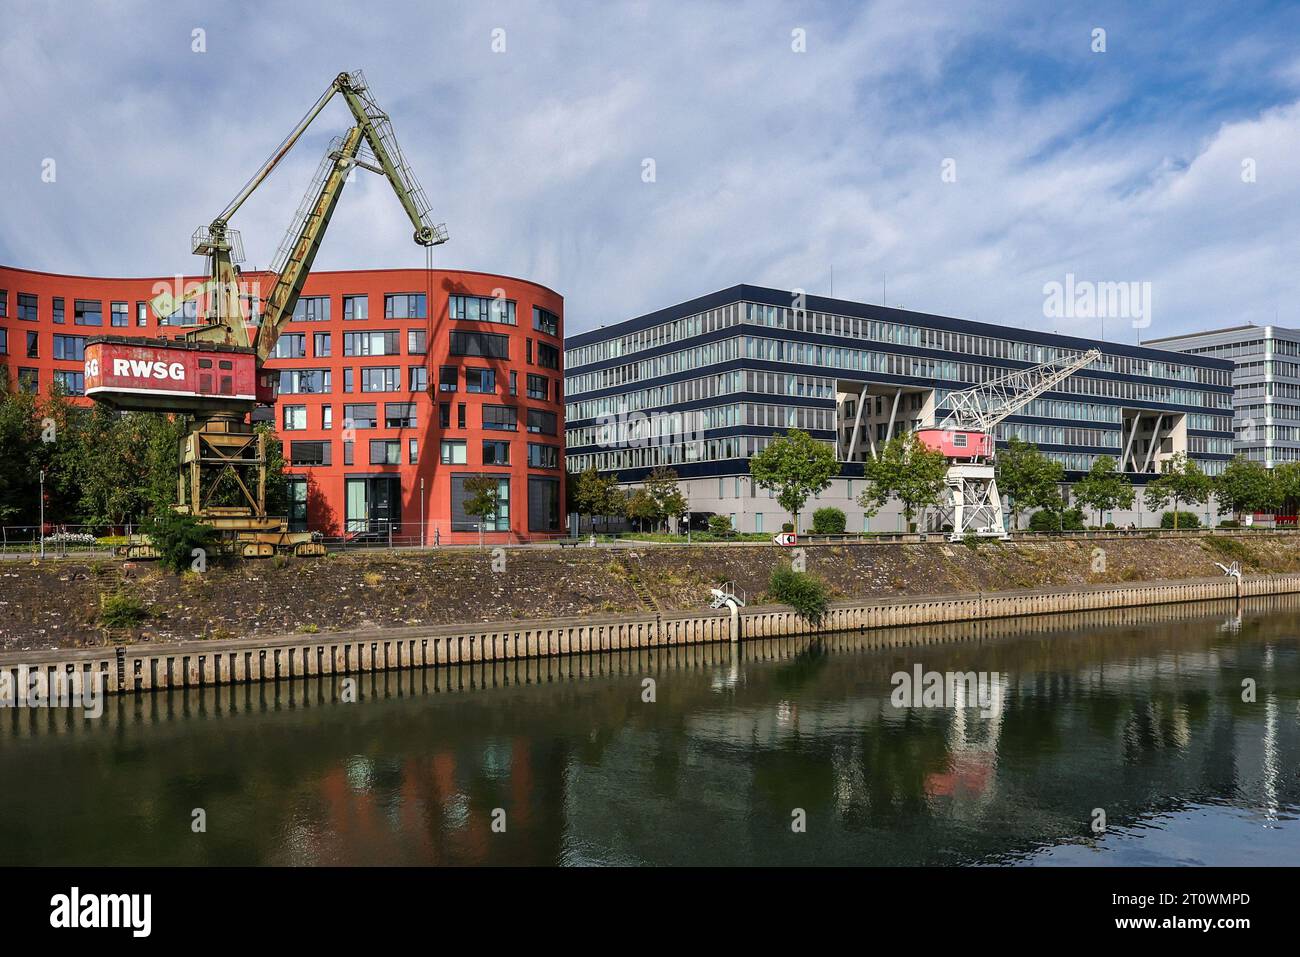 Duisburg, Ruhr area, North Rhine-Westphalia, Germany - Duisburg inner harbor with the wave-shaped building of the North Rhine-Westphalia state archive Stock Photo